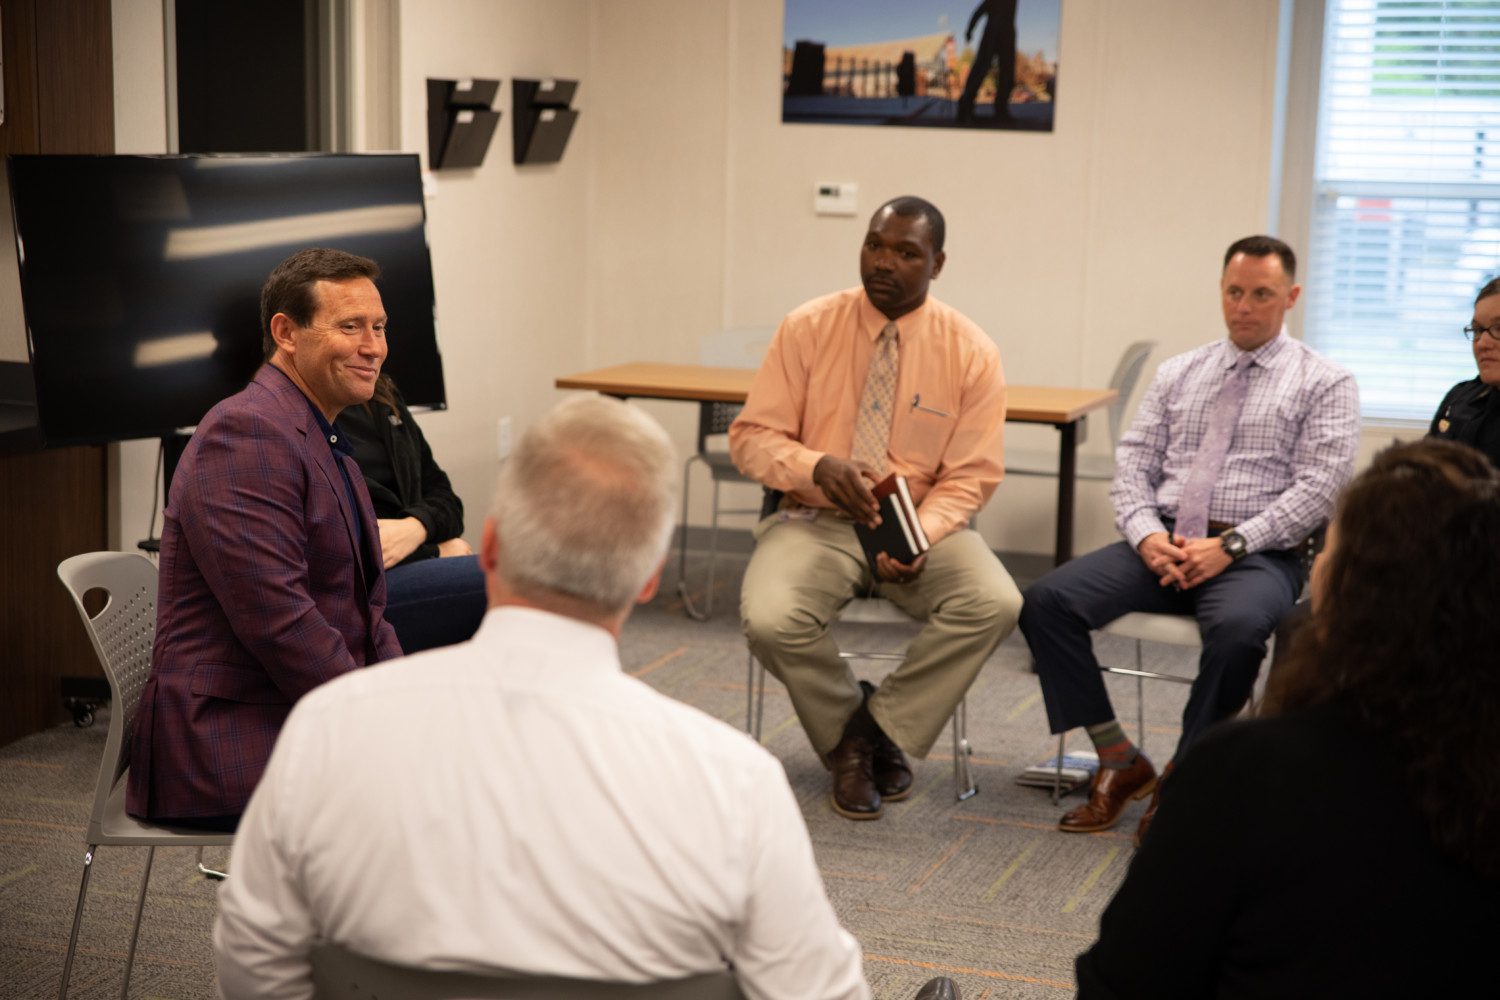 Jon Gordon, noted speaker and author, visits with members of CUPD on April 5, 2019.